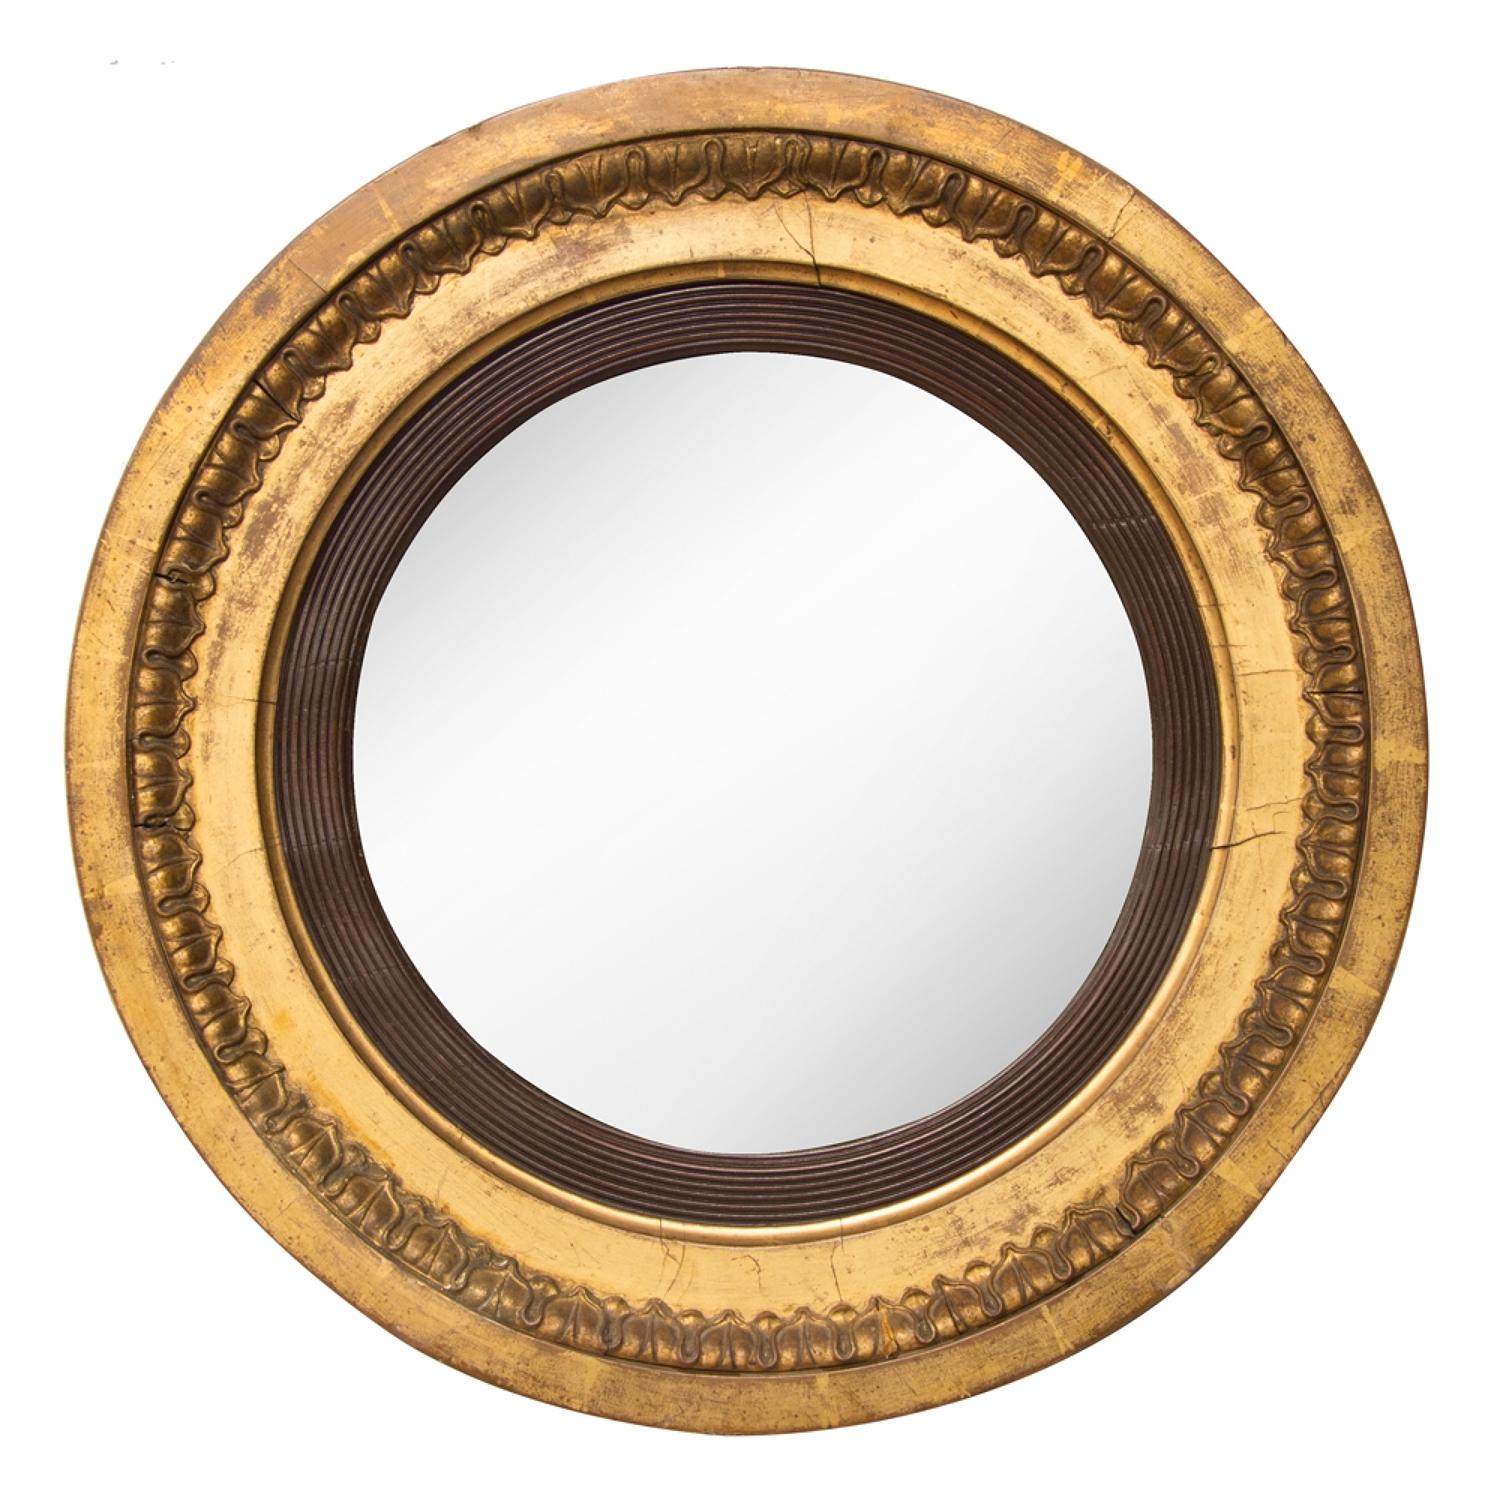 Early Convex Mirror with Original Mercury Plate Glass c.1800